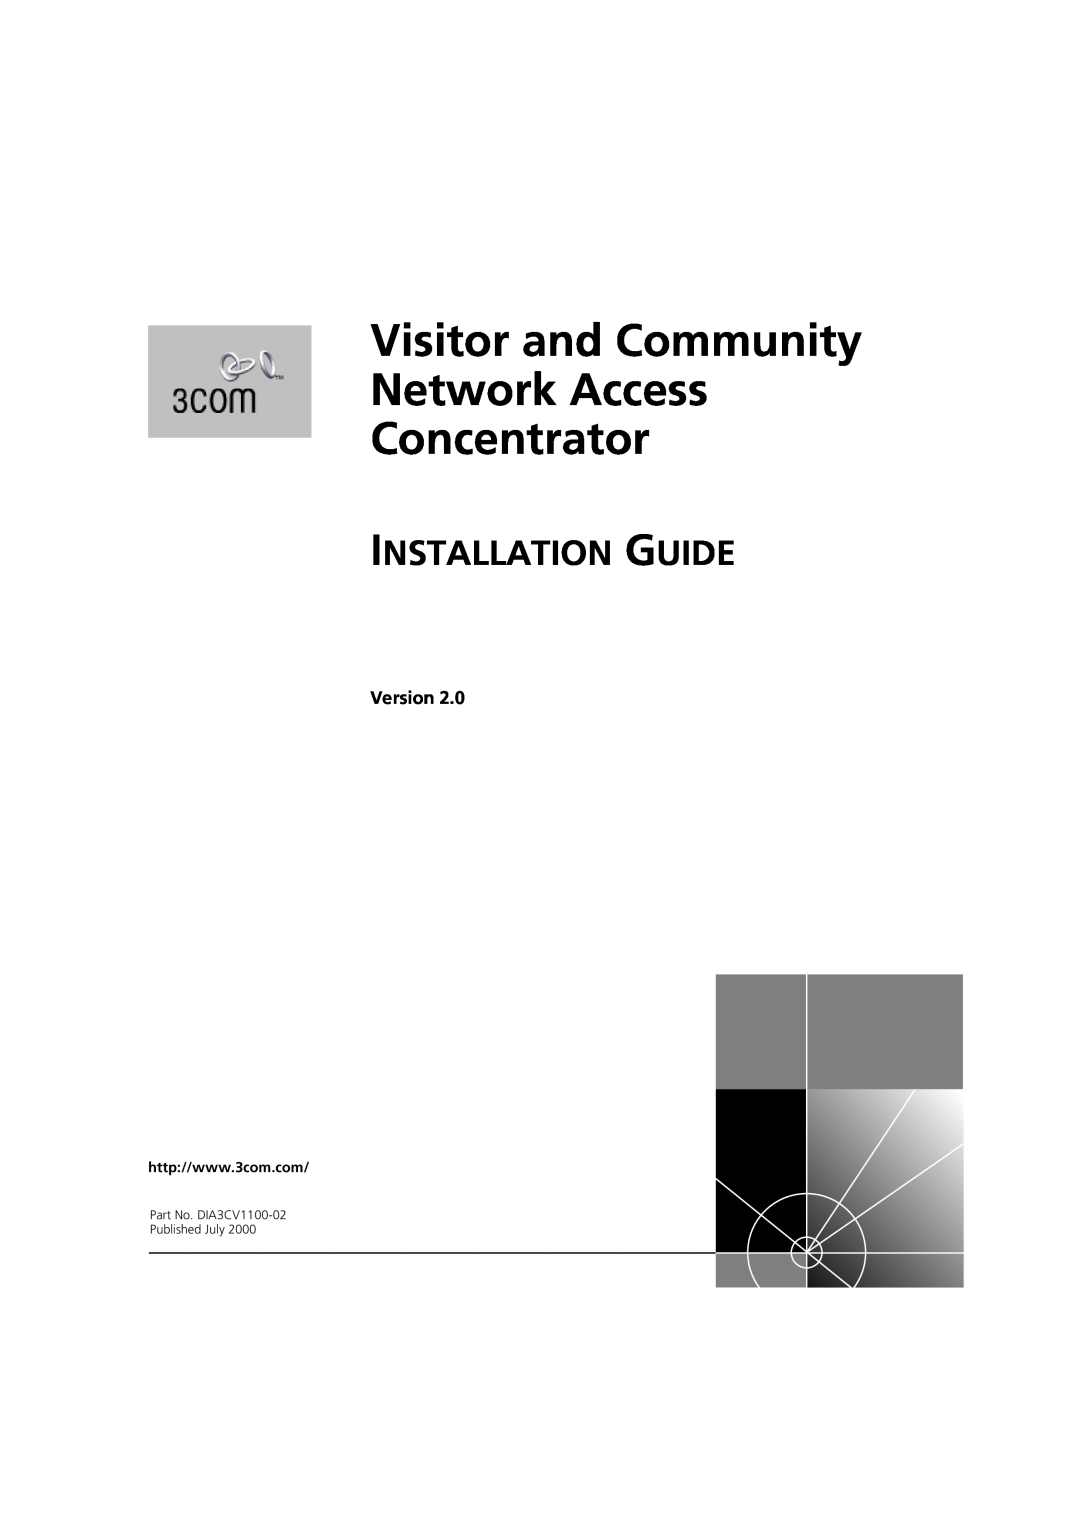 3Com DIA3CV1100-02 manual Installation Guide, Visitor and Community Network Access Concentrator, Version 